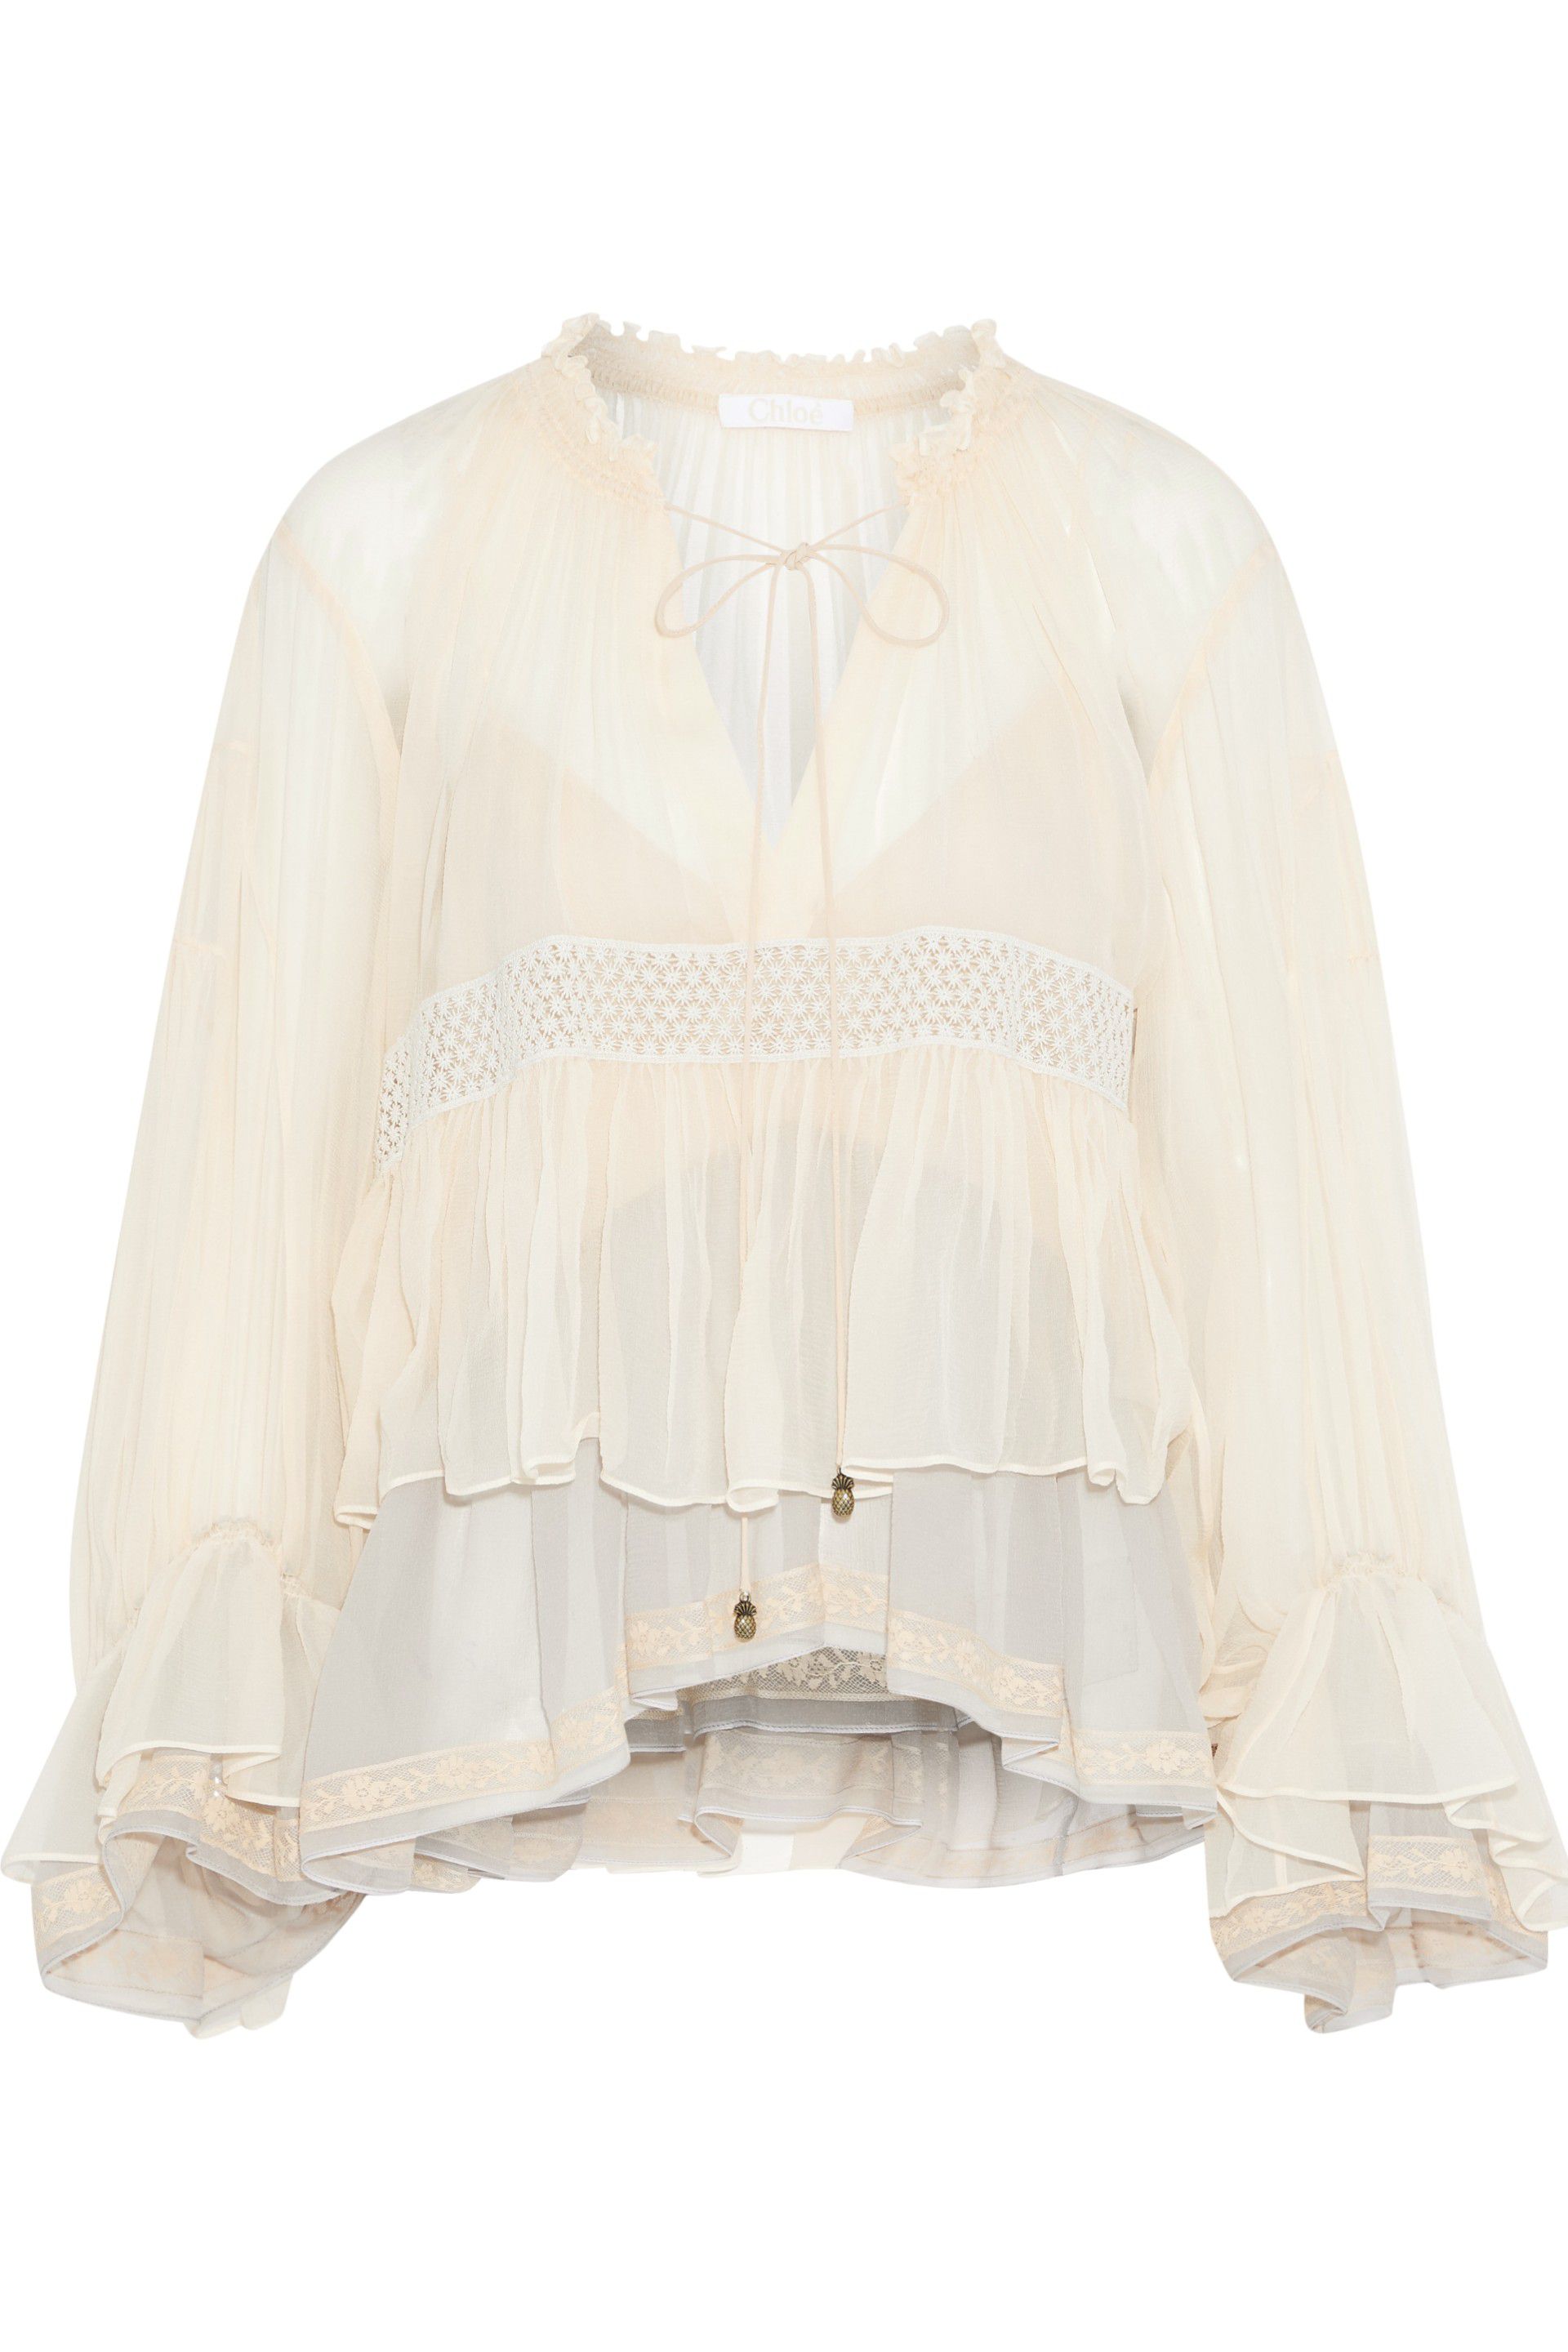 Chloé |Sale Up To 70% Off At THE OUTNET